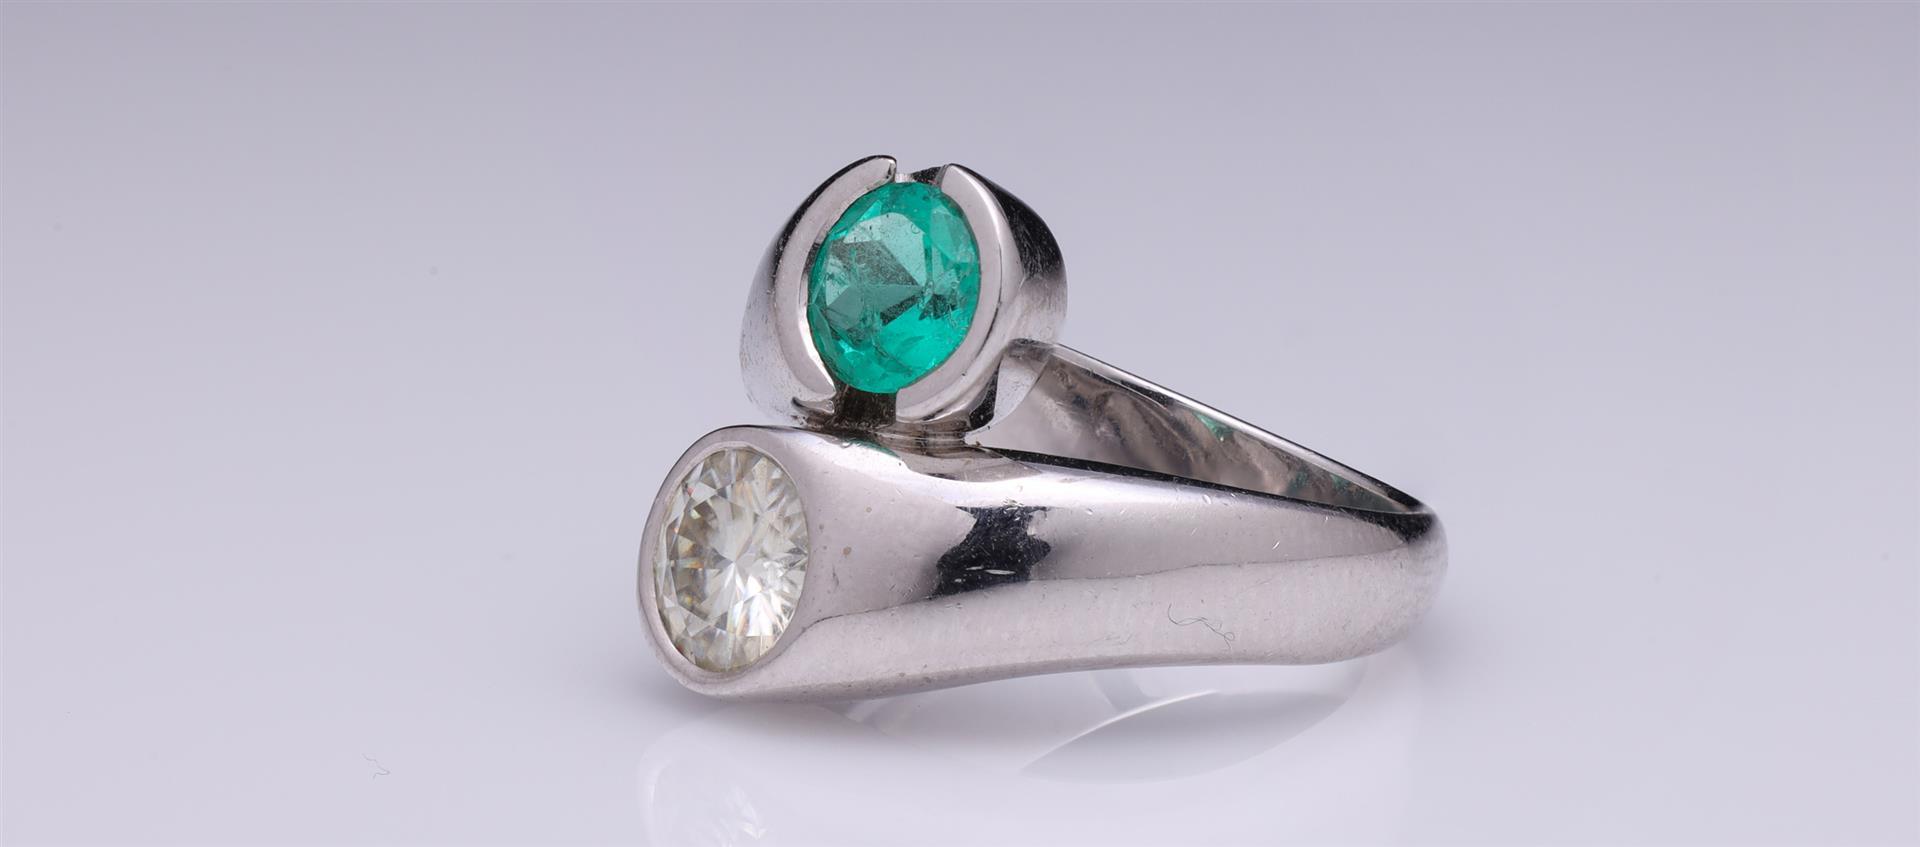 18k White Gold Moissanite & Emerald Crossover Ring by Carlo Rici